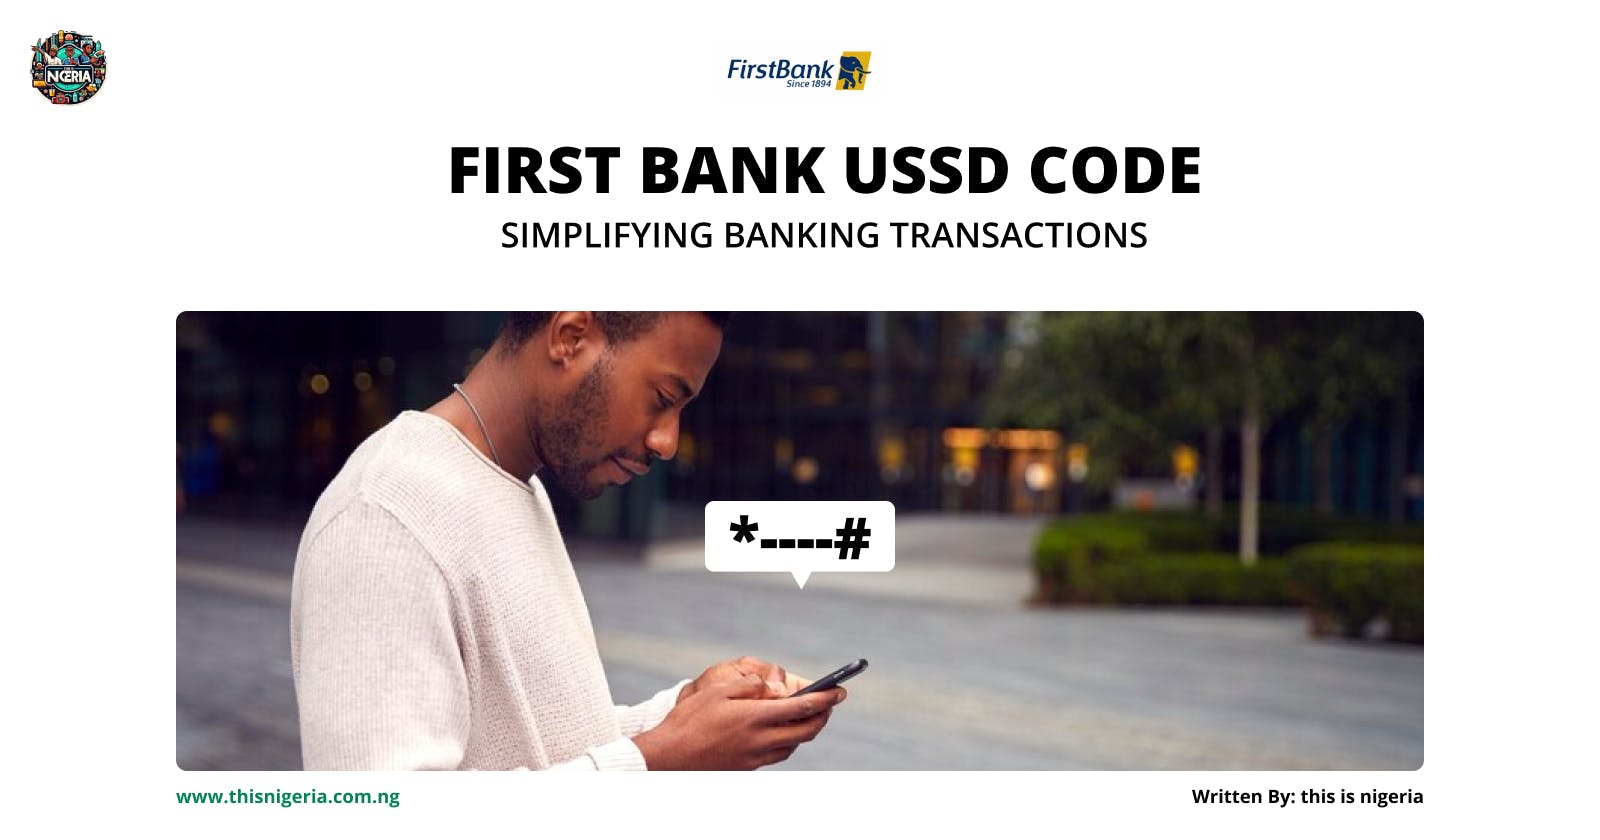 First Bank USSD Code: Simplifying Banking Transactions.